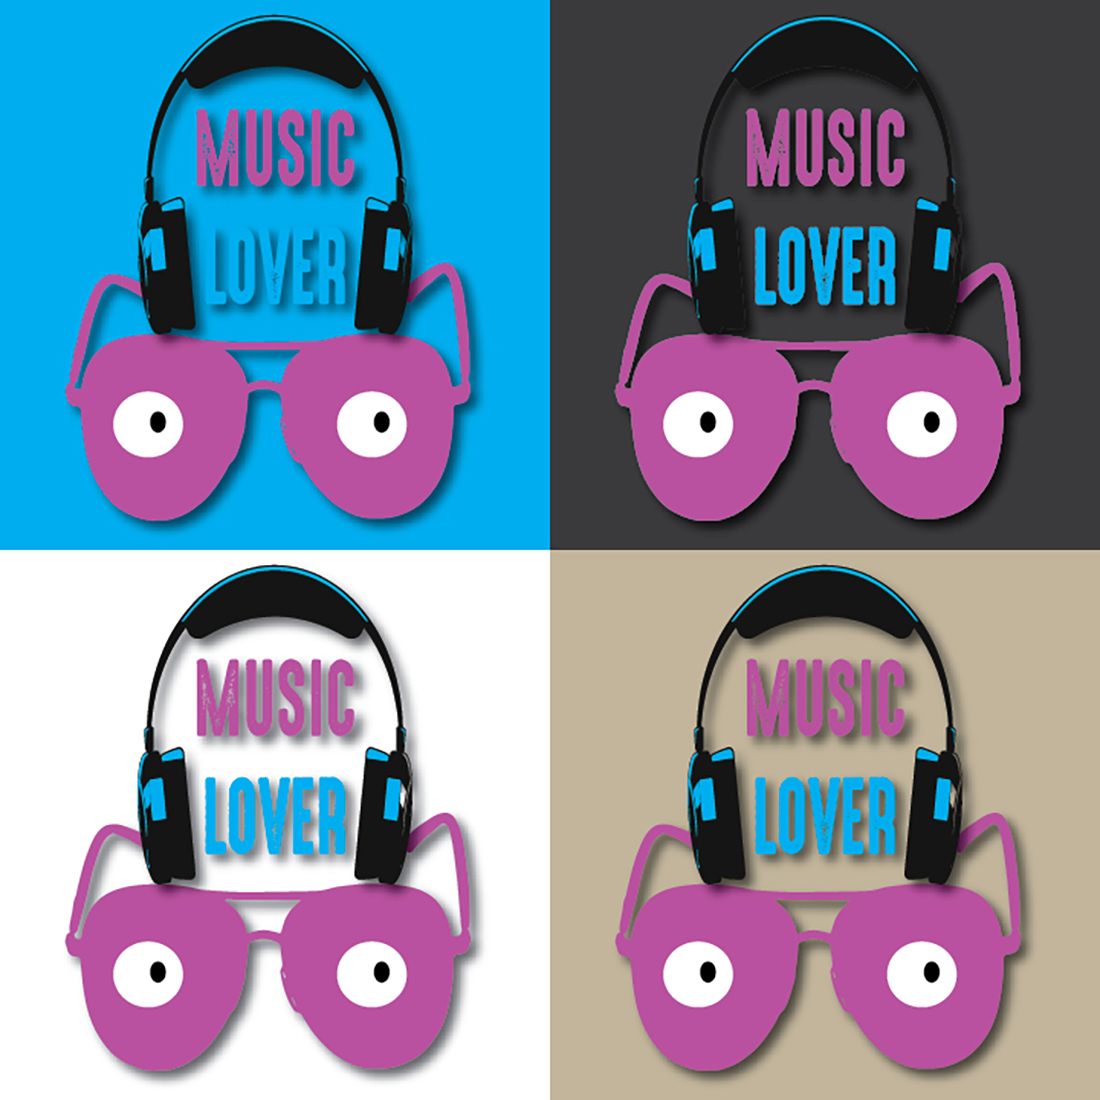 Music T-Shirt Design cover image.